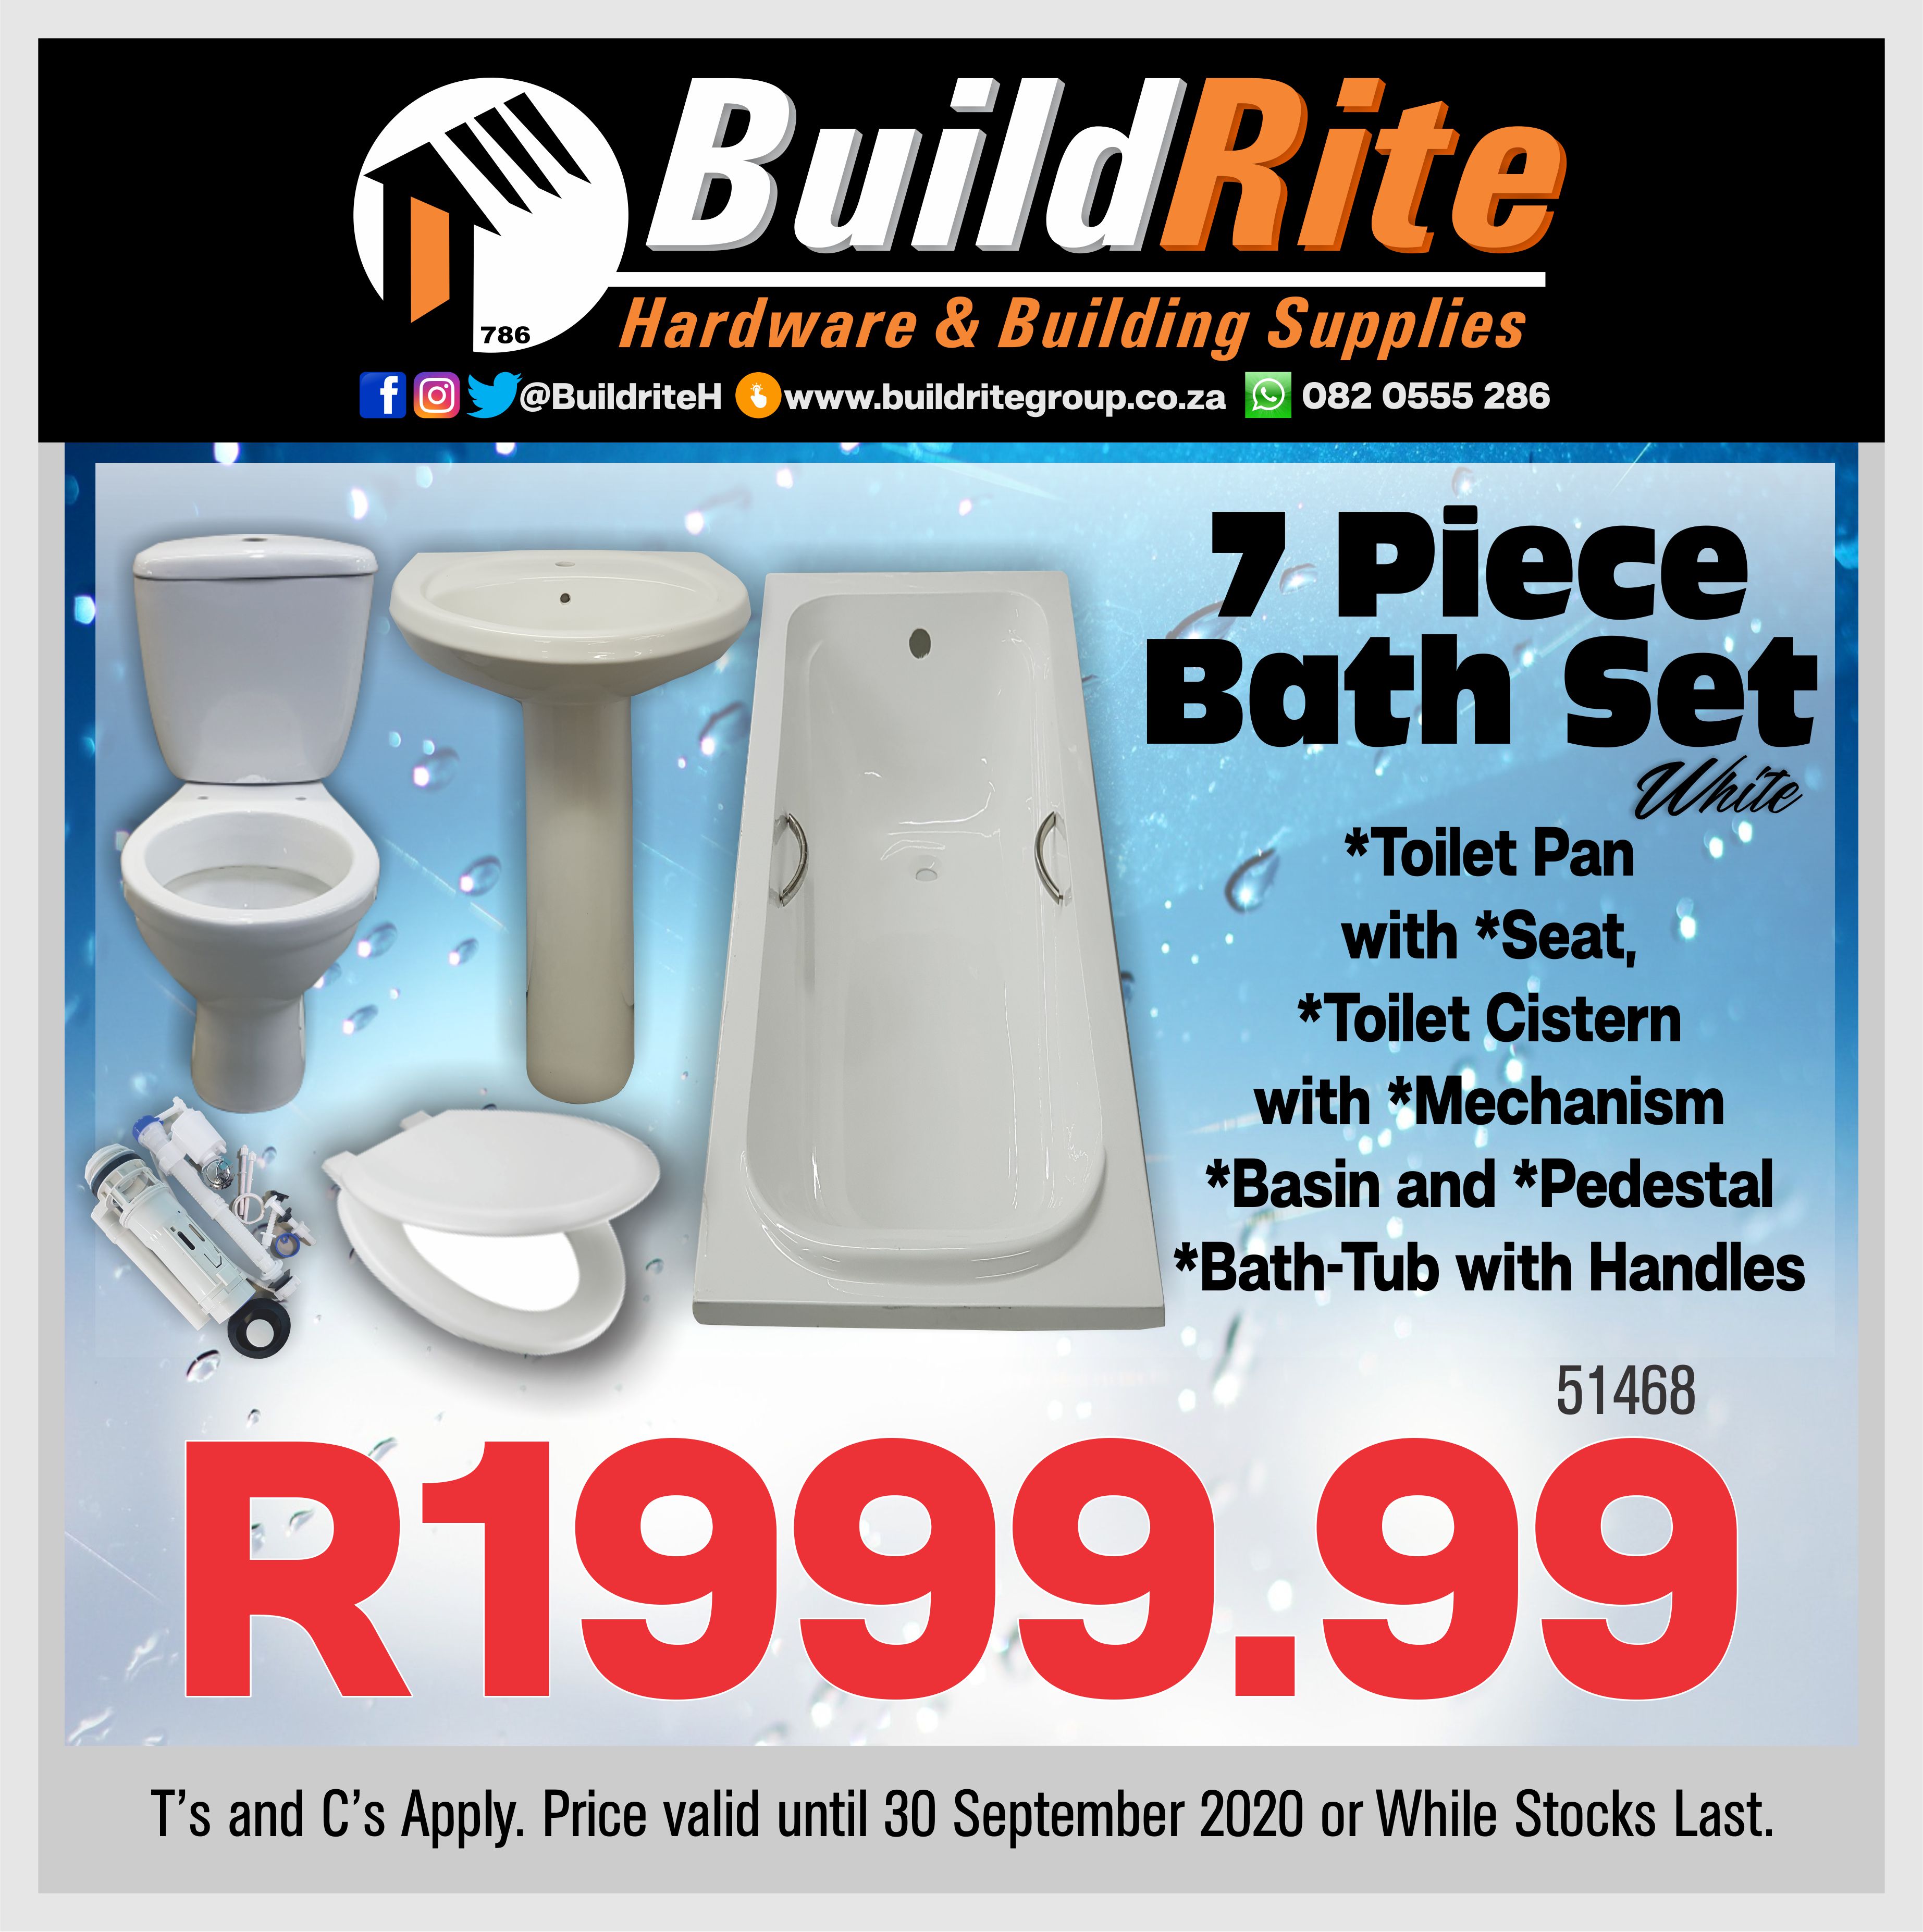 BuildriteHardware on X: "Great Value for Money with this 7 Piece Bath Set...  Grab all the accessories and fittings at the same time at all BuildRite  Hardware Stores!!! #hardwarestore #hardware #buildingmaterials #tools #